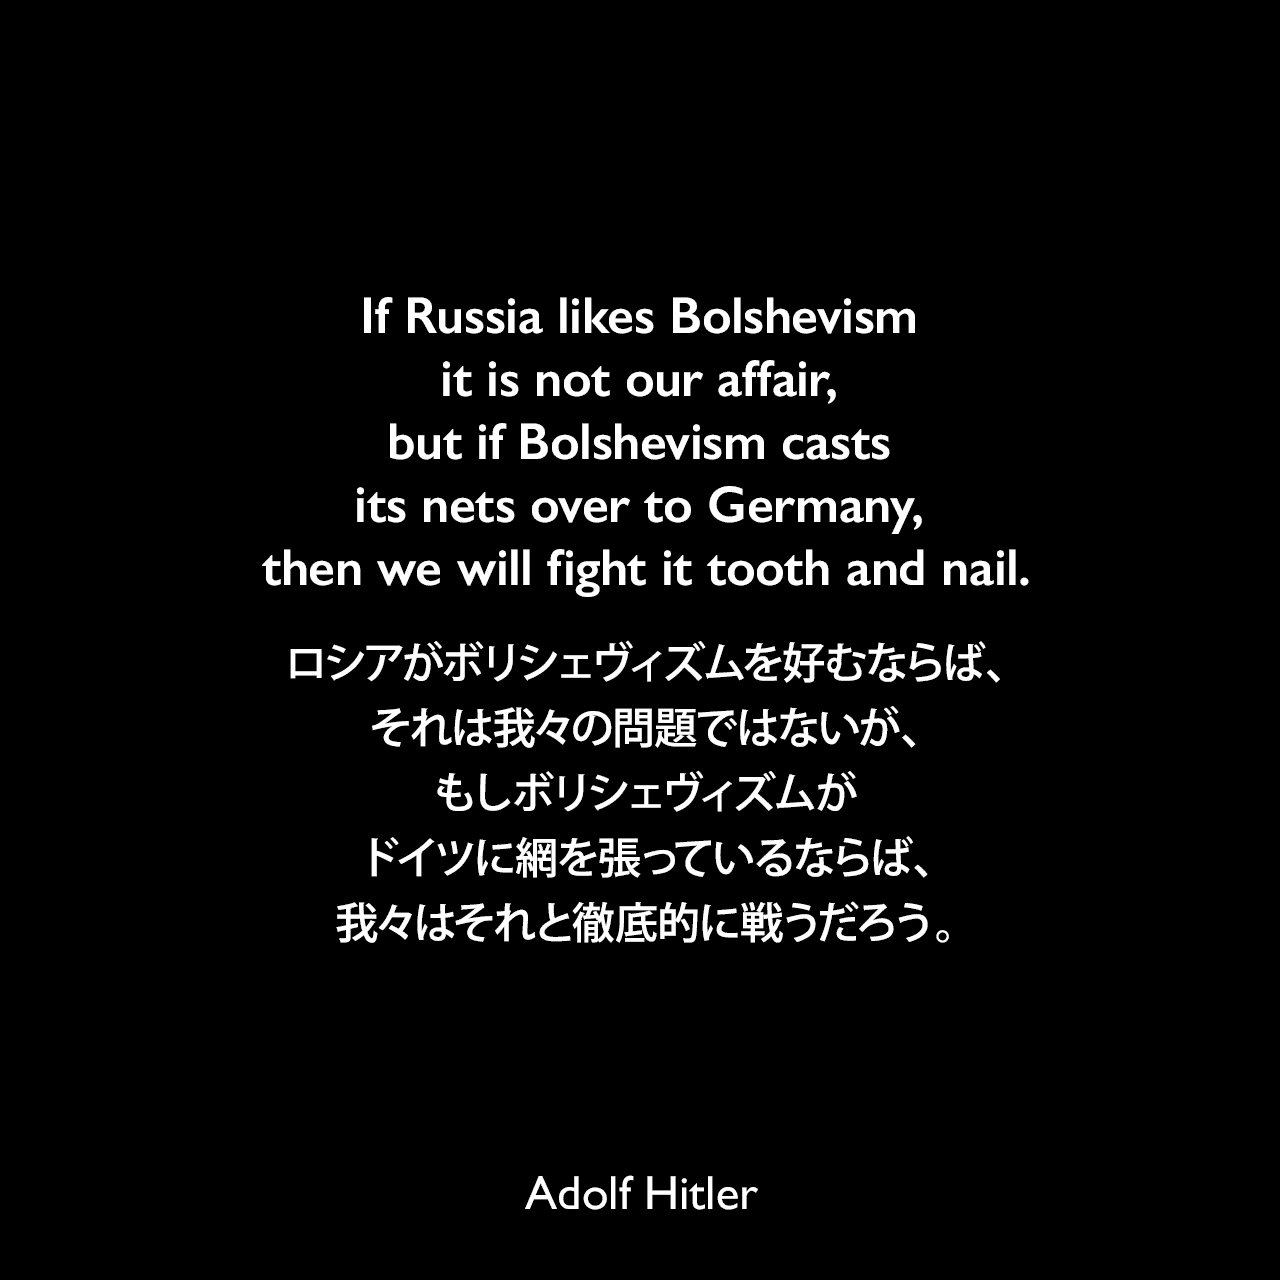 If Russia likes Bolshevism it is not our affair, but if Bolshevism casts its nets over to Germany, then we will fight it tooth and nail.ロシアがボリシェヴィズムを好むならば、それは我々の問題ではないが、もしボリシェヴィズムがドイツに網を張っているならば、我々はそれと徹底的に戦うだろう。- 1935年5月21日ライヒスタークでのスピーチよりAdolf Hitler